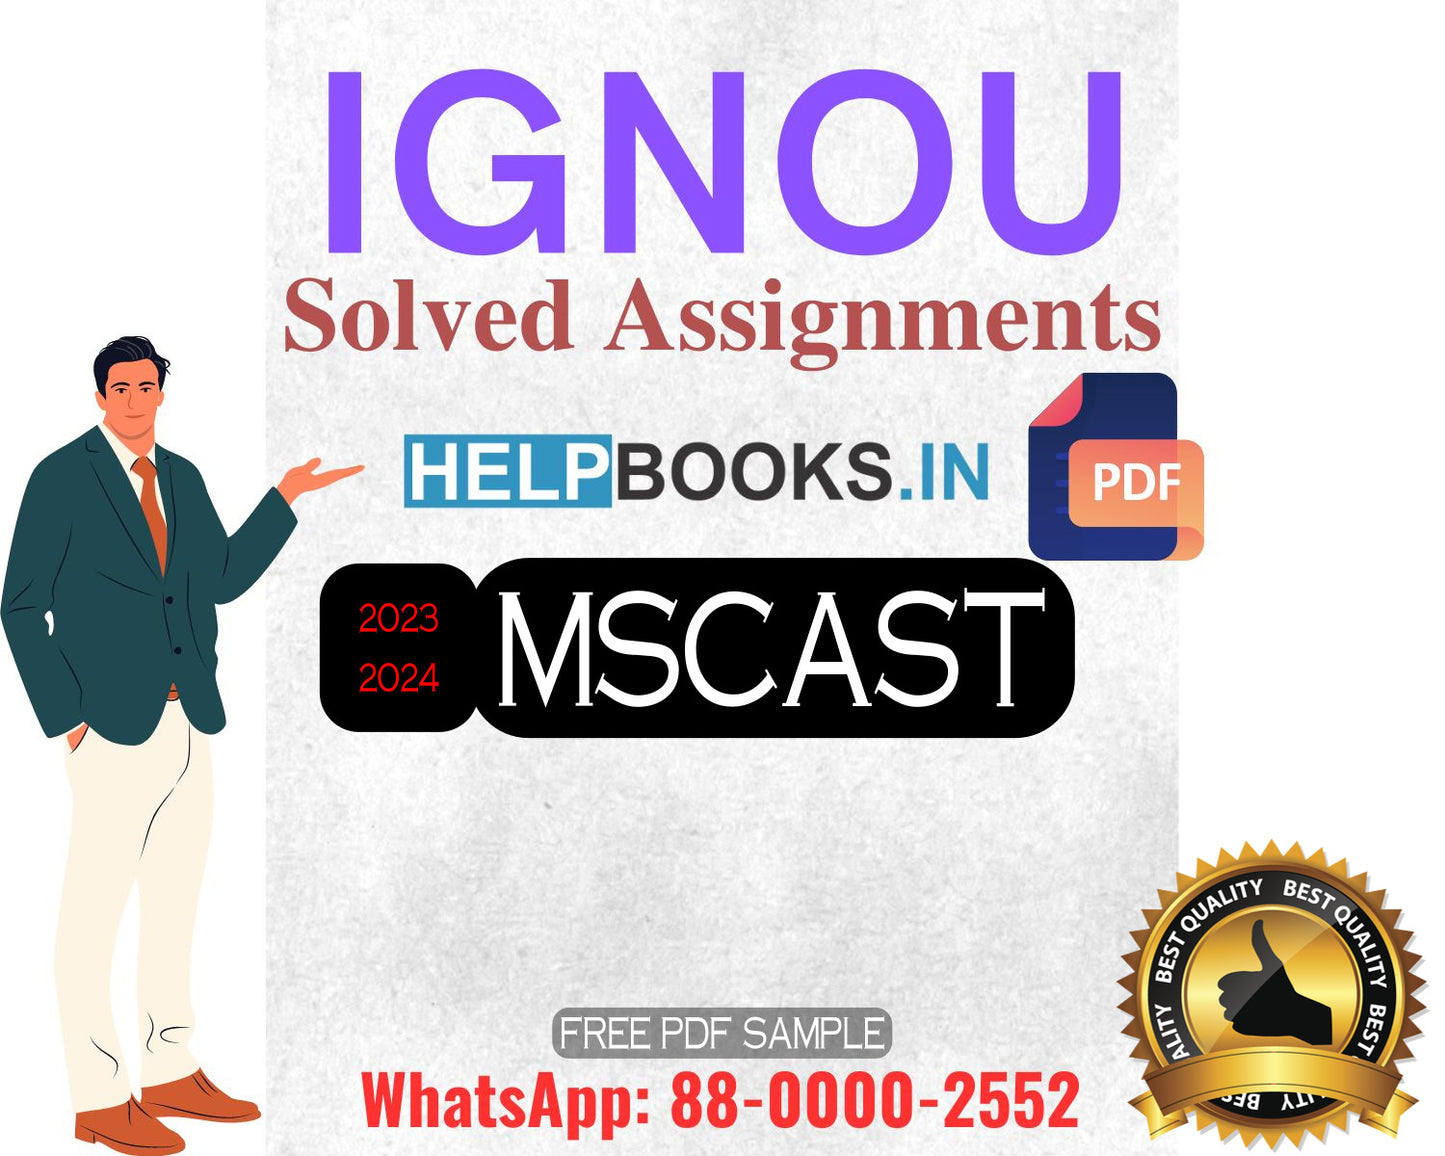 IGNOU Master's Degree Programme Latest IGNOU Solved Assignment 2023-24 & 2022-23 Sessions : MSCAST Master of Science Applied Statistics Solved Assignments